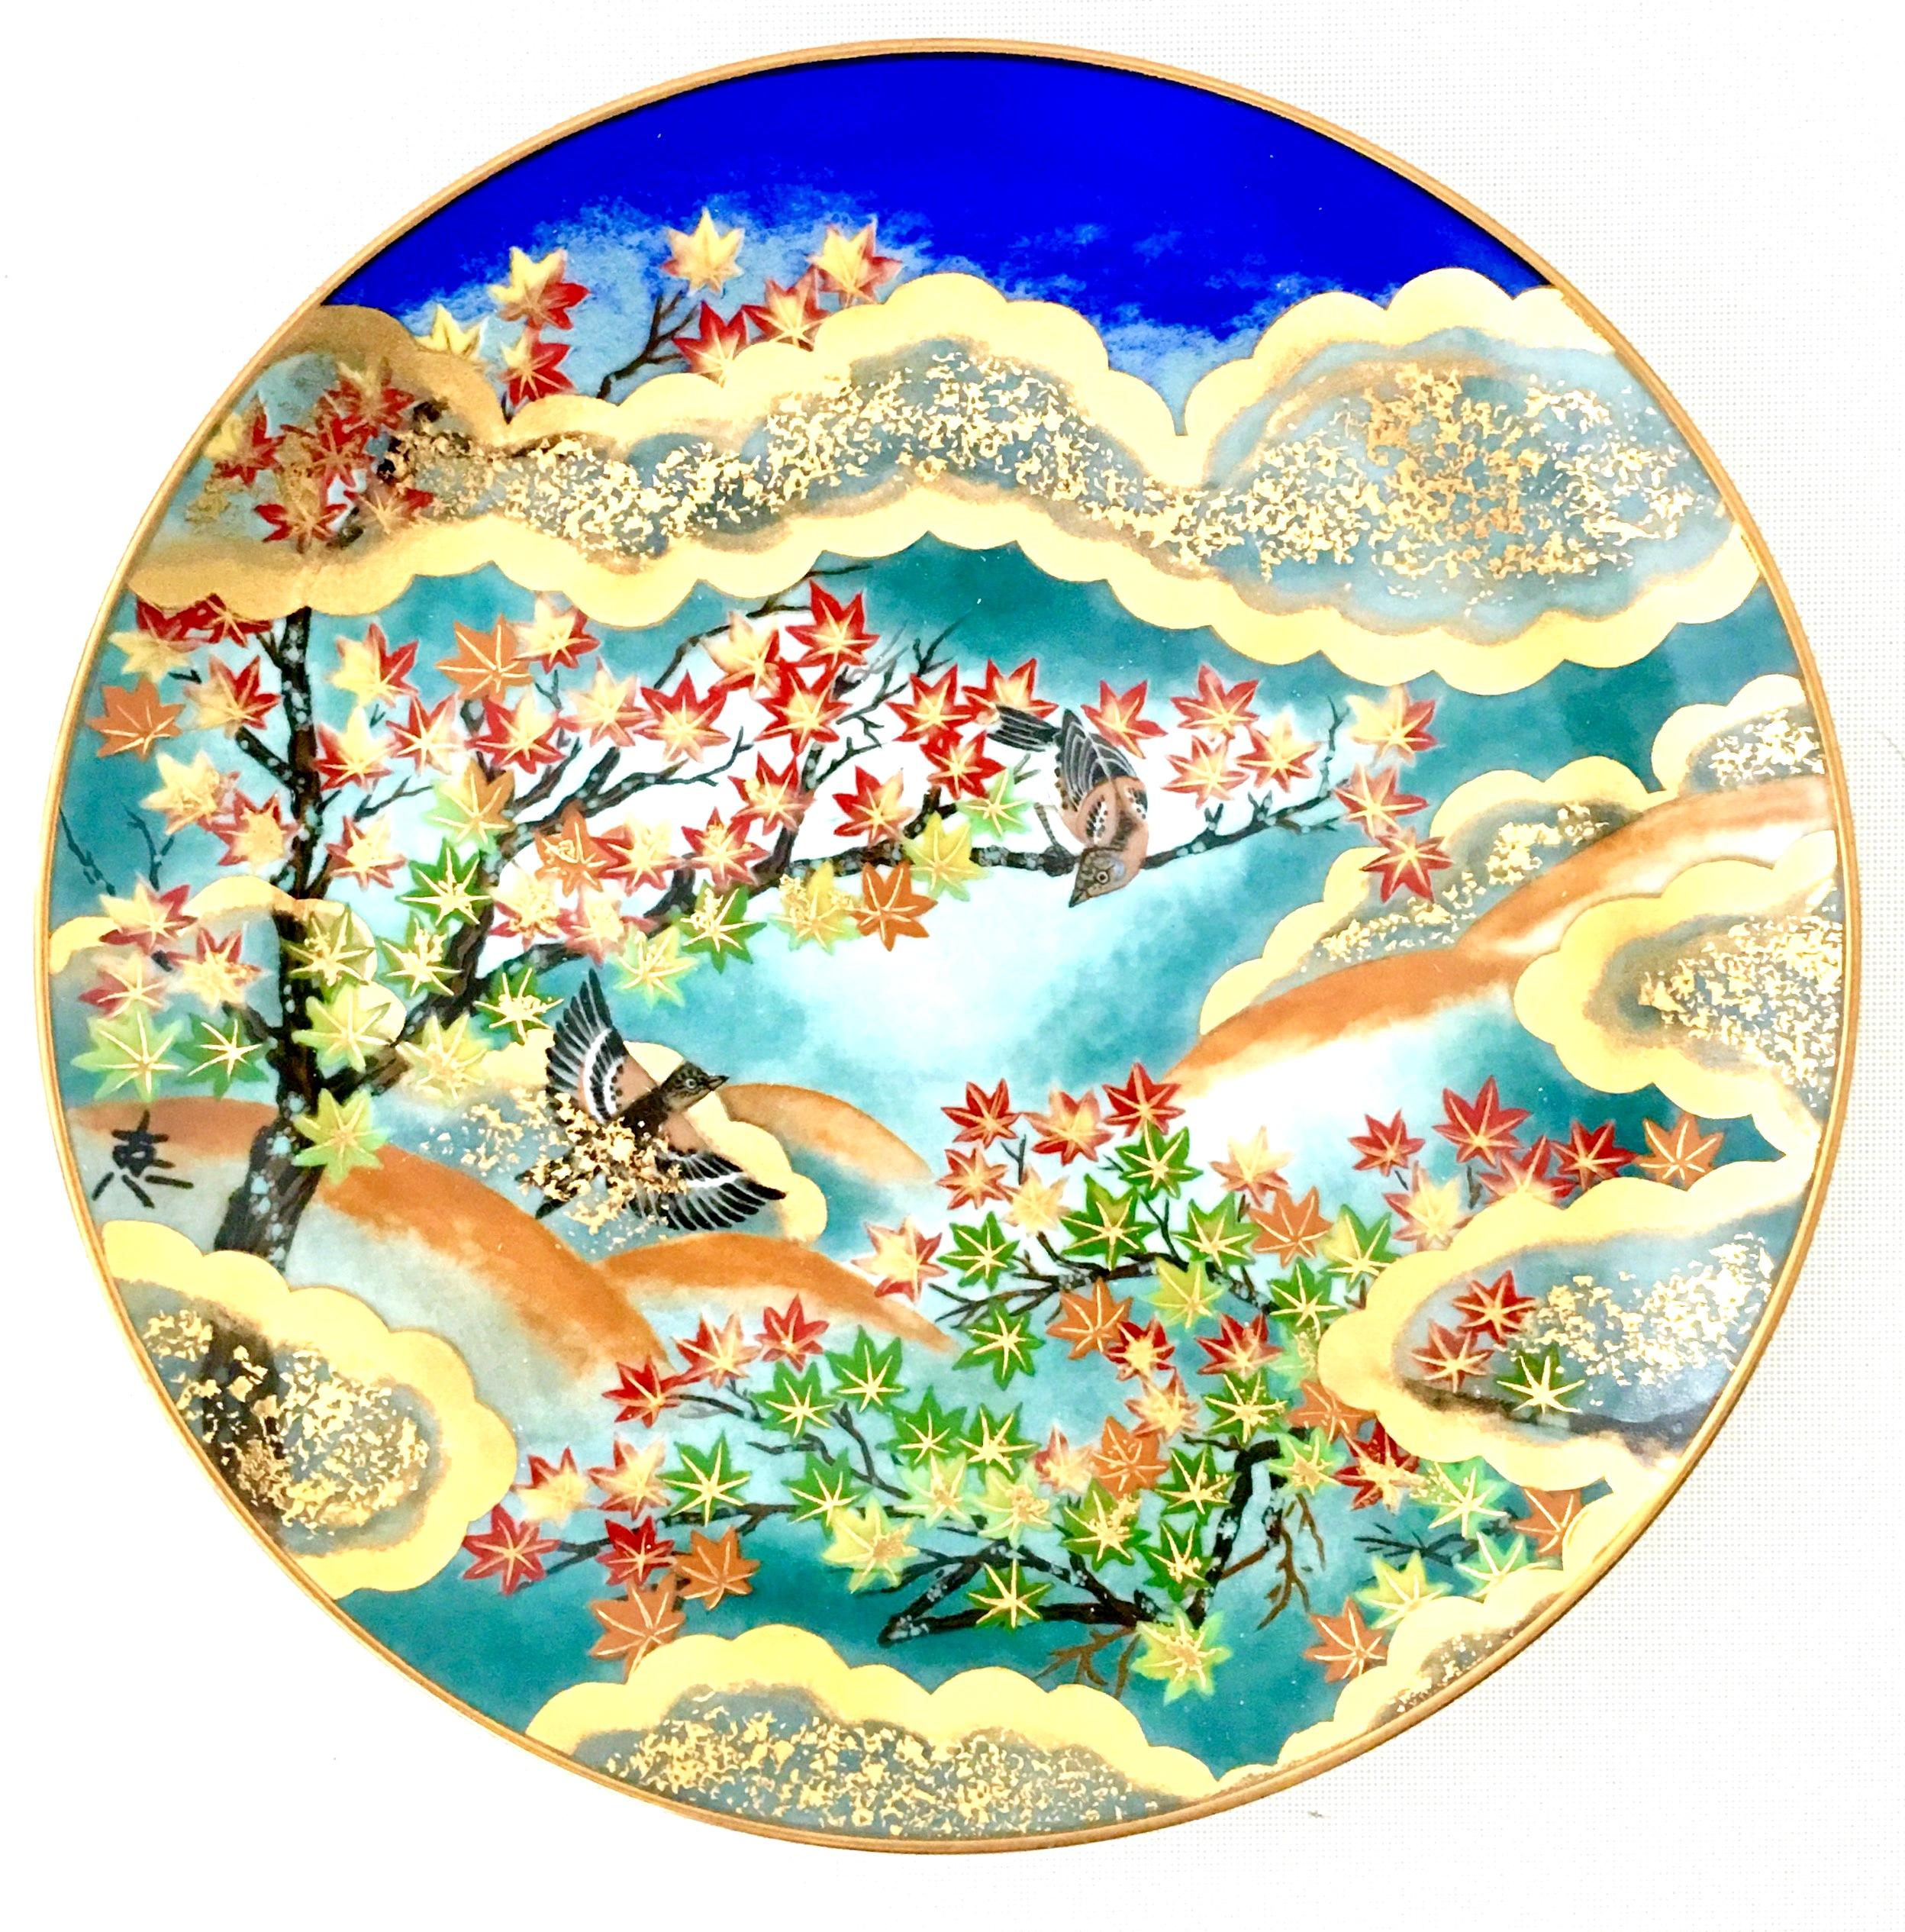 1986 Japanese Limited Edition Hand-Painted Porcelain Plates Set of 4 In Good Condition For Sale In West Palm Beach, FL